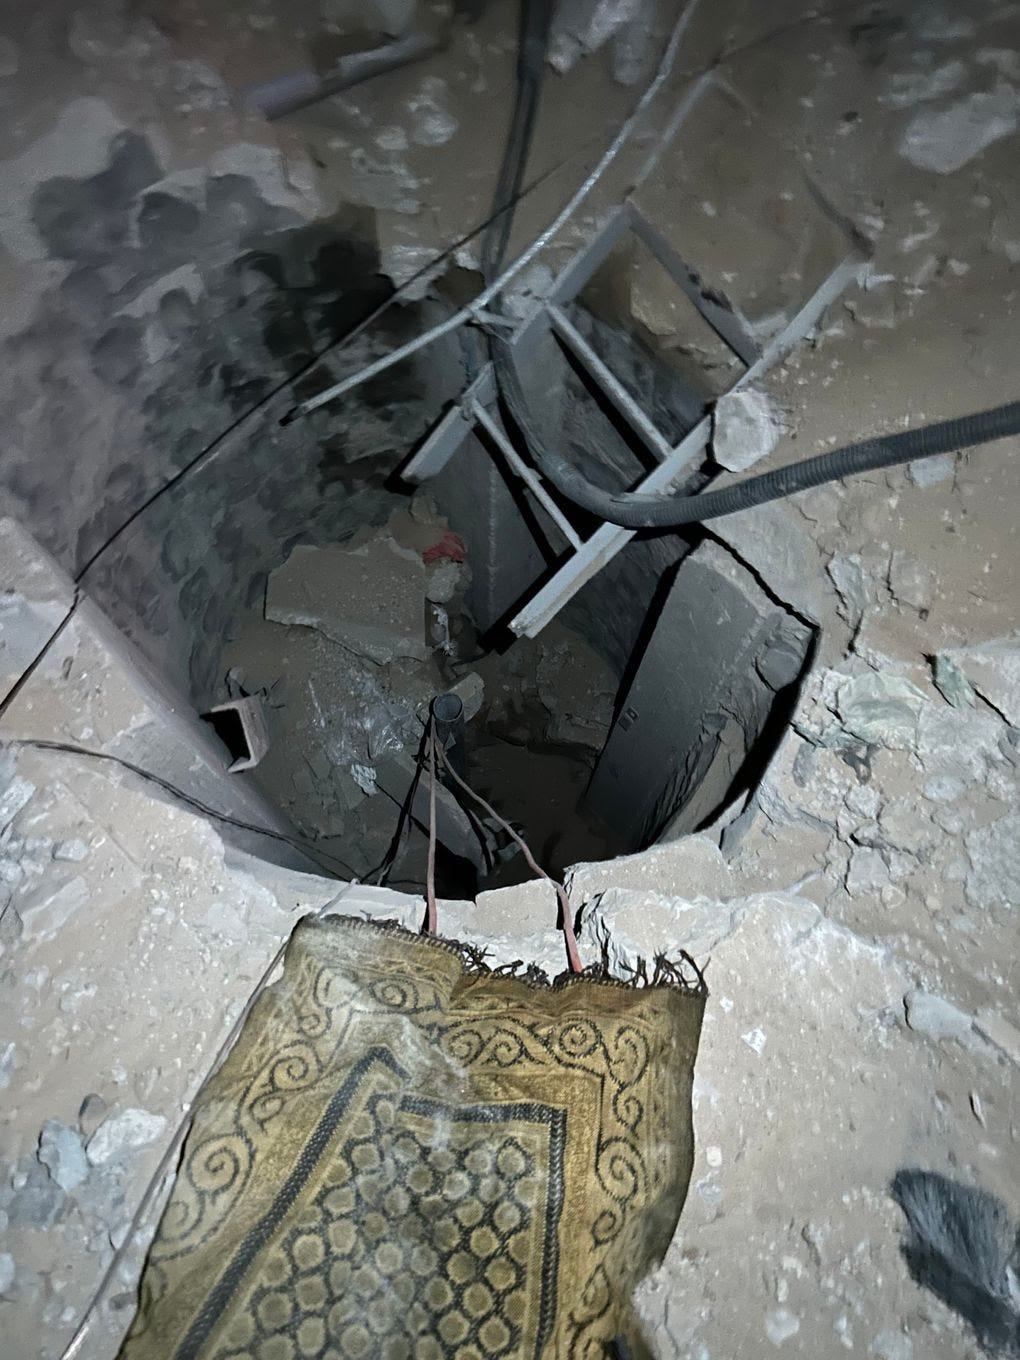 Israeli military officials say this opening recently uncovered within the compound wall of Gaza’s al-Shifa Hospital is a shaft that connects to a Hamas tunnel network. (Steve Hendrix/The Washington Post)